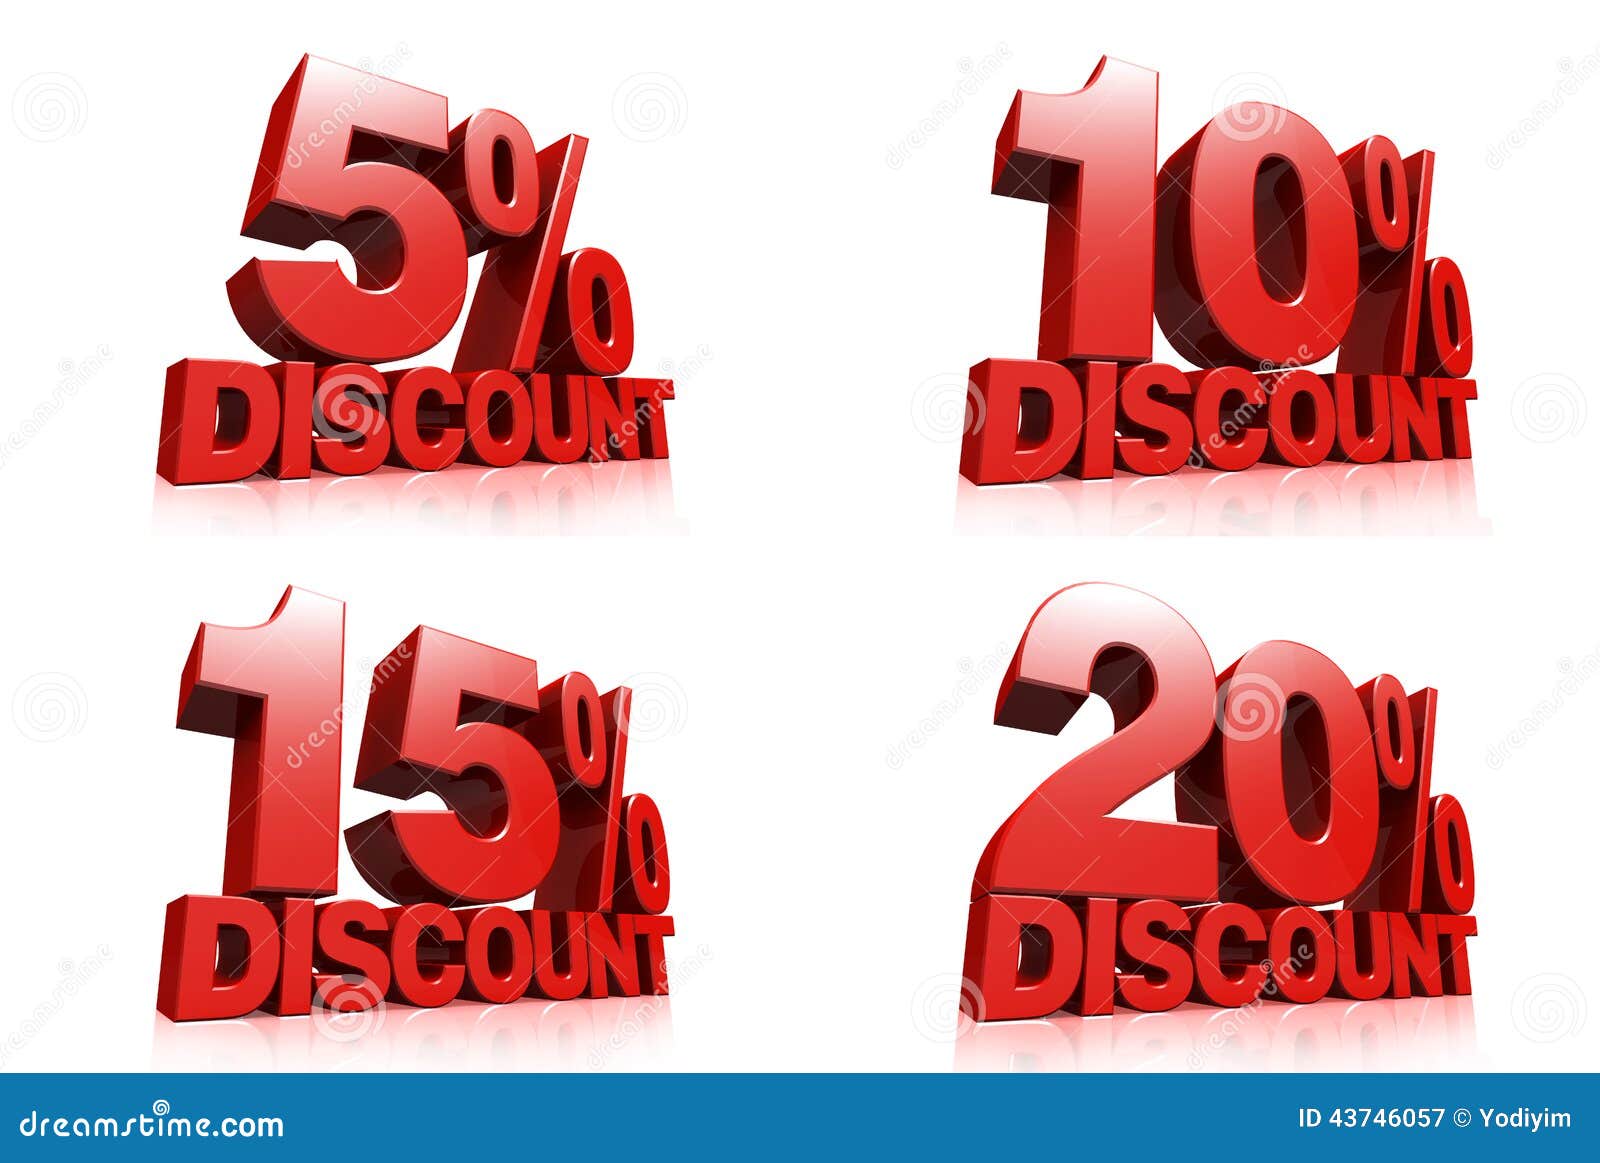 35 Percent Off Discount For Sale Promotion Number With Percent Sign